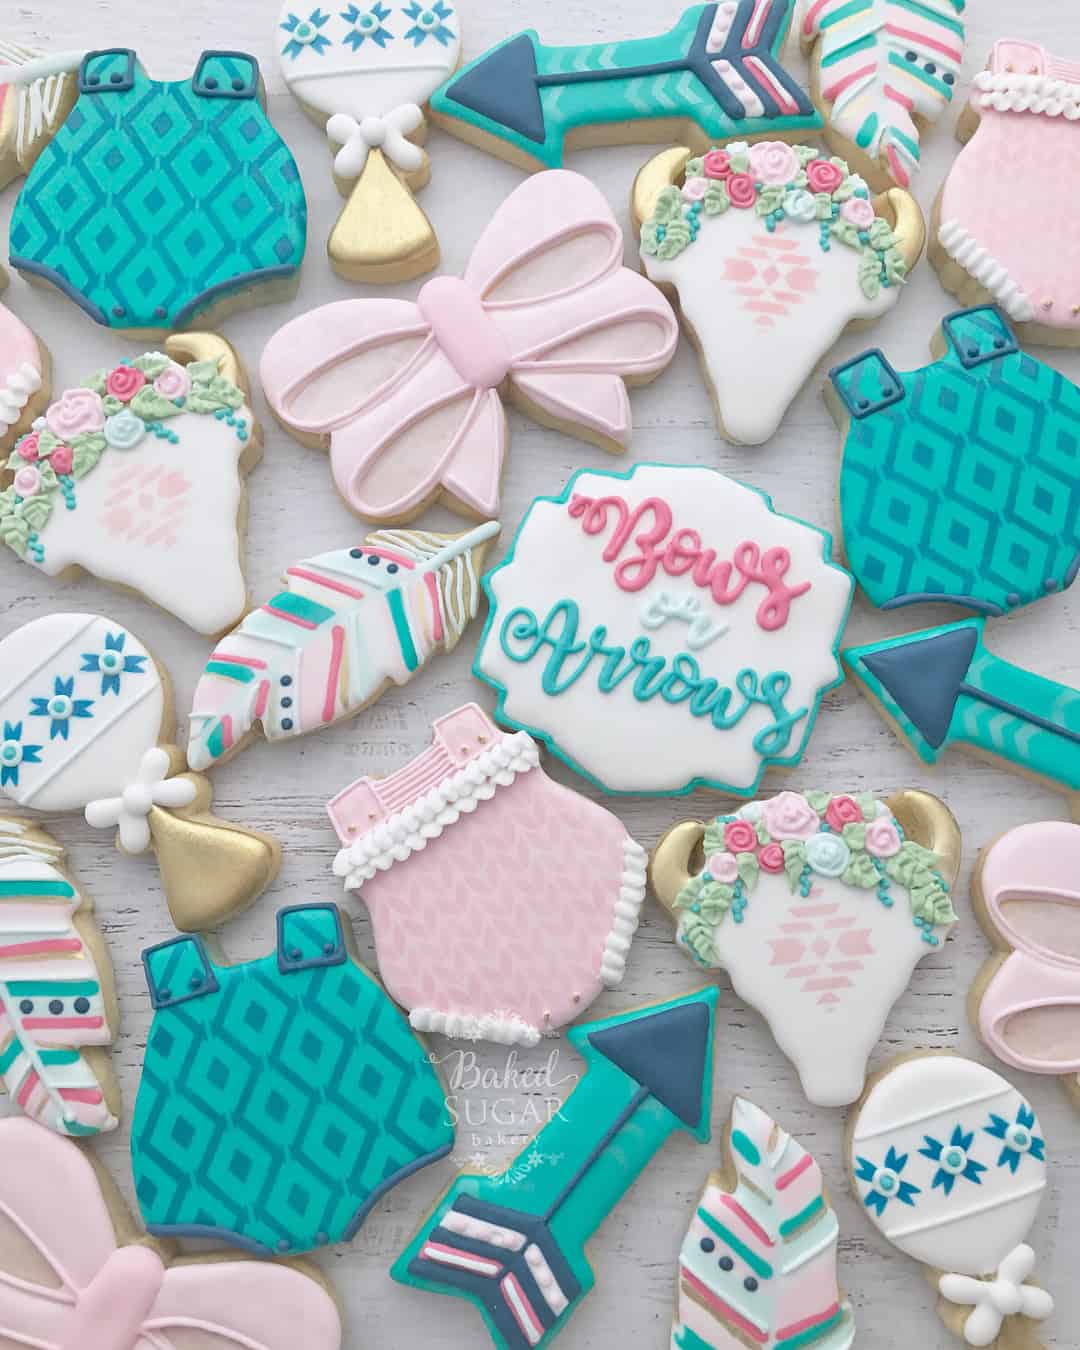 10 Best themes for gender reveal party